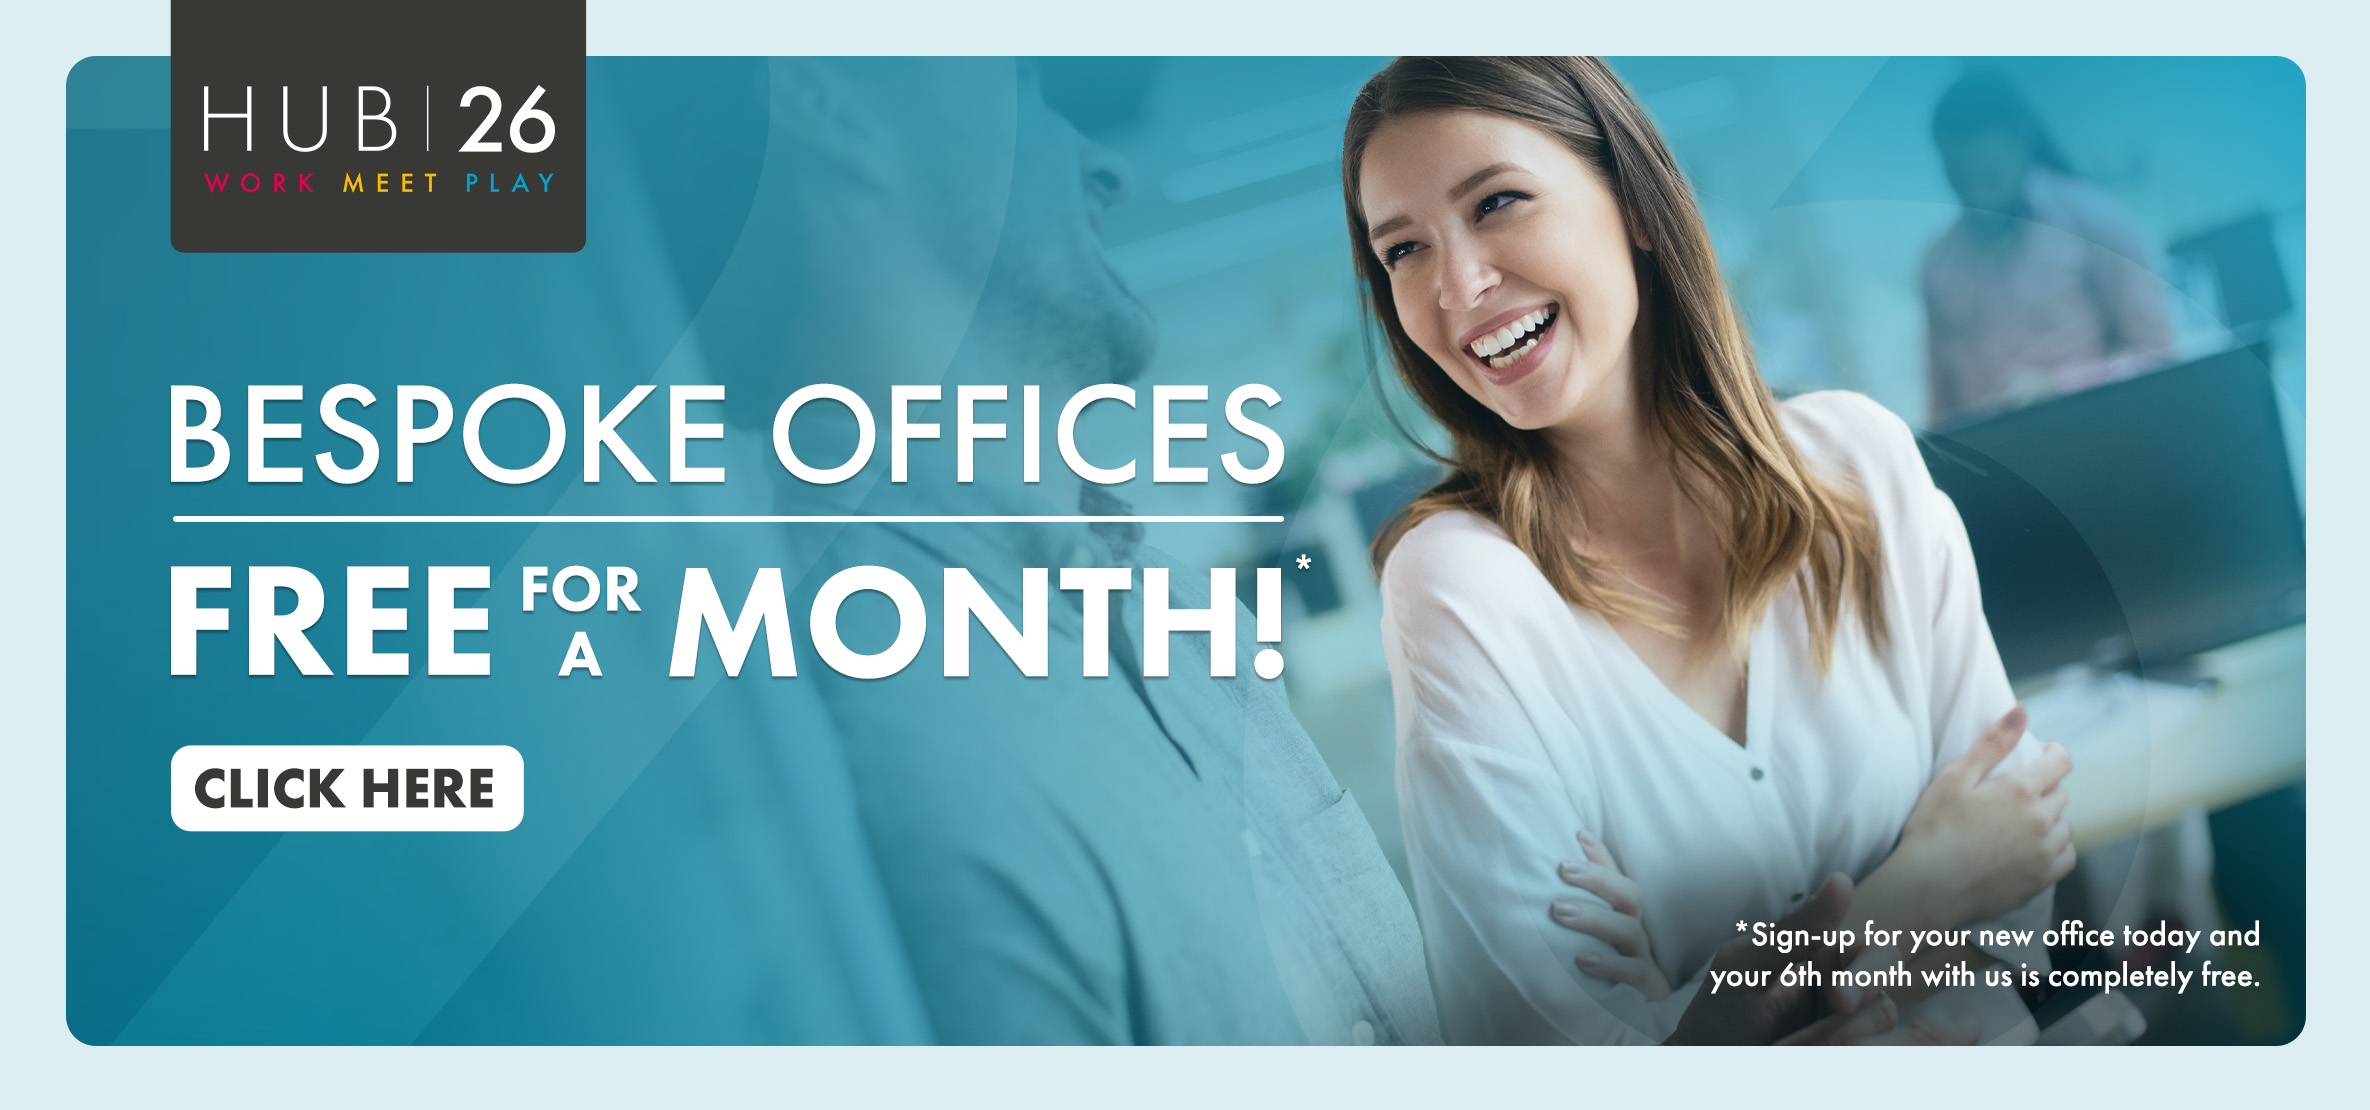 OFFICES FREE--banner-1